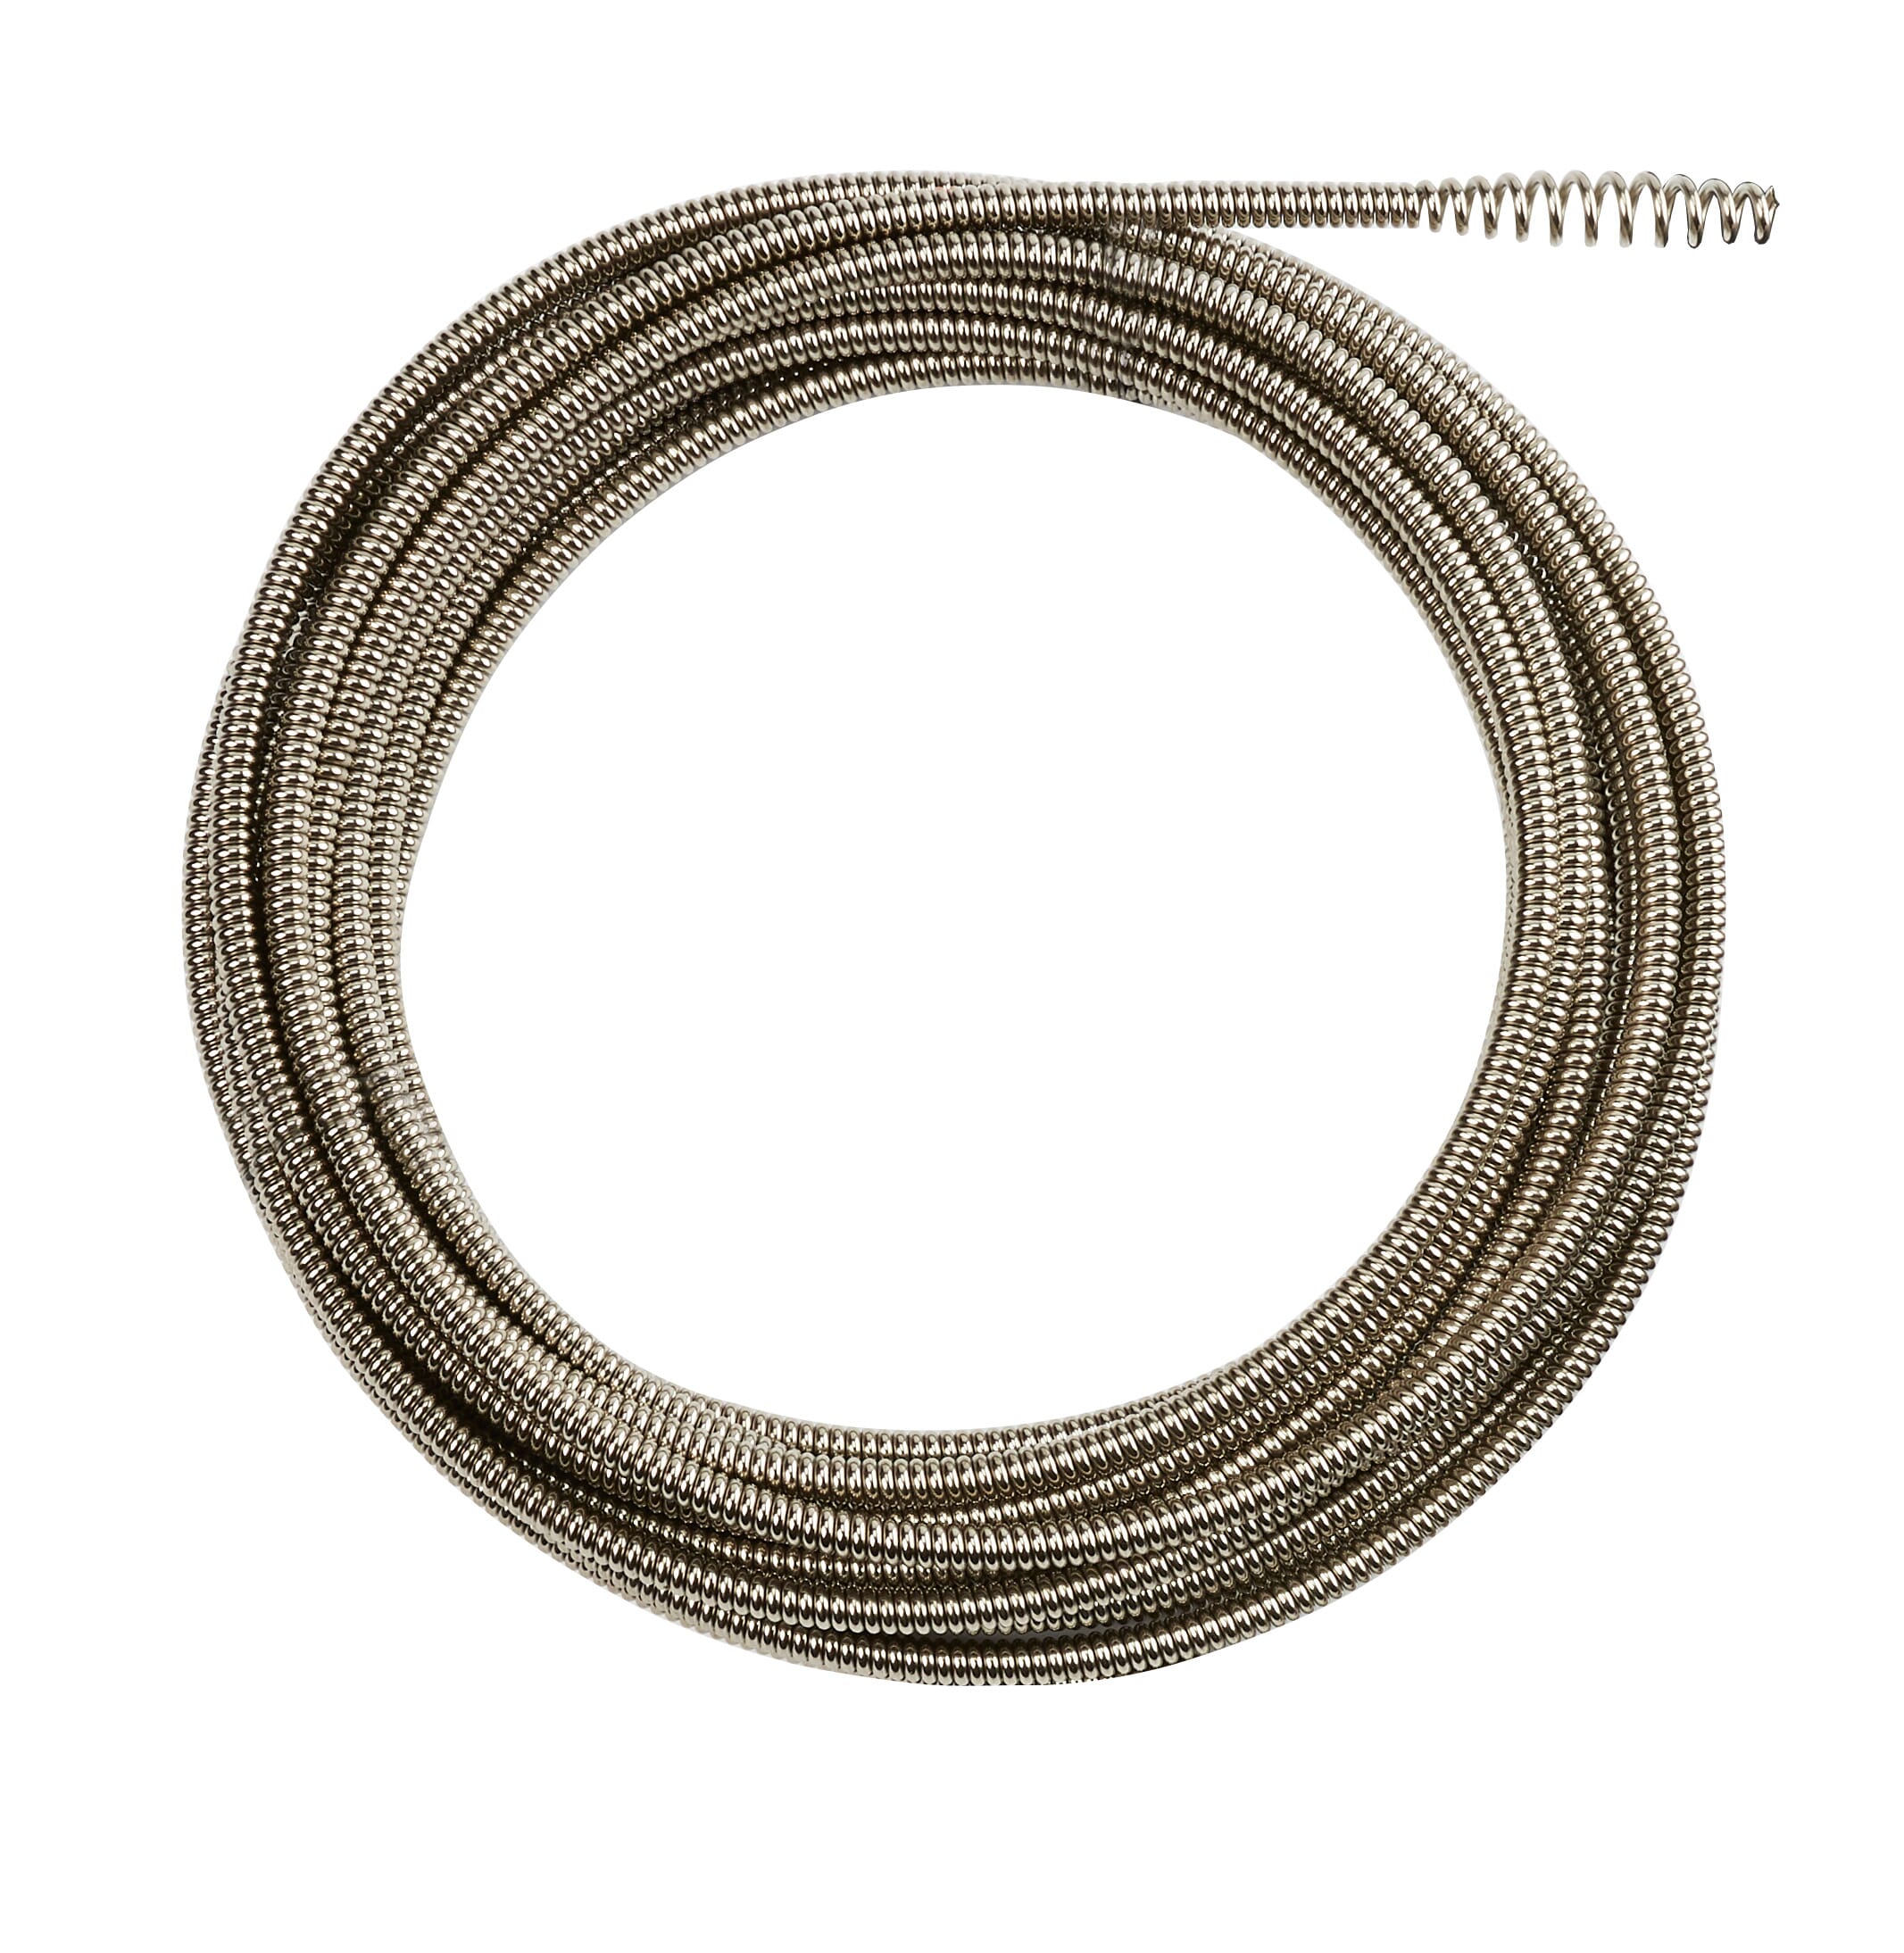 Milwaukee® 48-53-2674 Inner Core Bulb Head Drain Cleaning Cable, 5/16 in, Steel, For Use With Drain Cleaning Machines, 1-1/4 to 2-1/2 in Drain Line